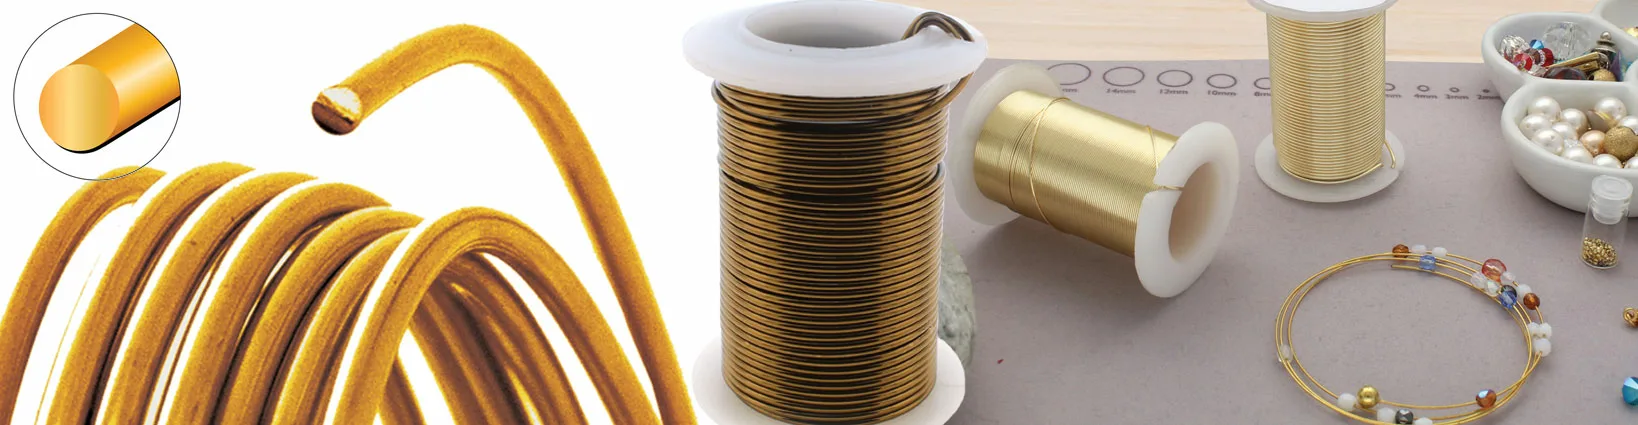 Artistic Wire, Silver Plated Craft Wire 22 Gauge Thick, Gold Color (8 Yard  Spool) 